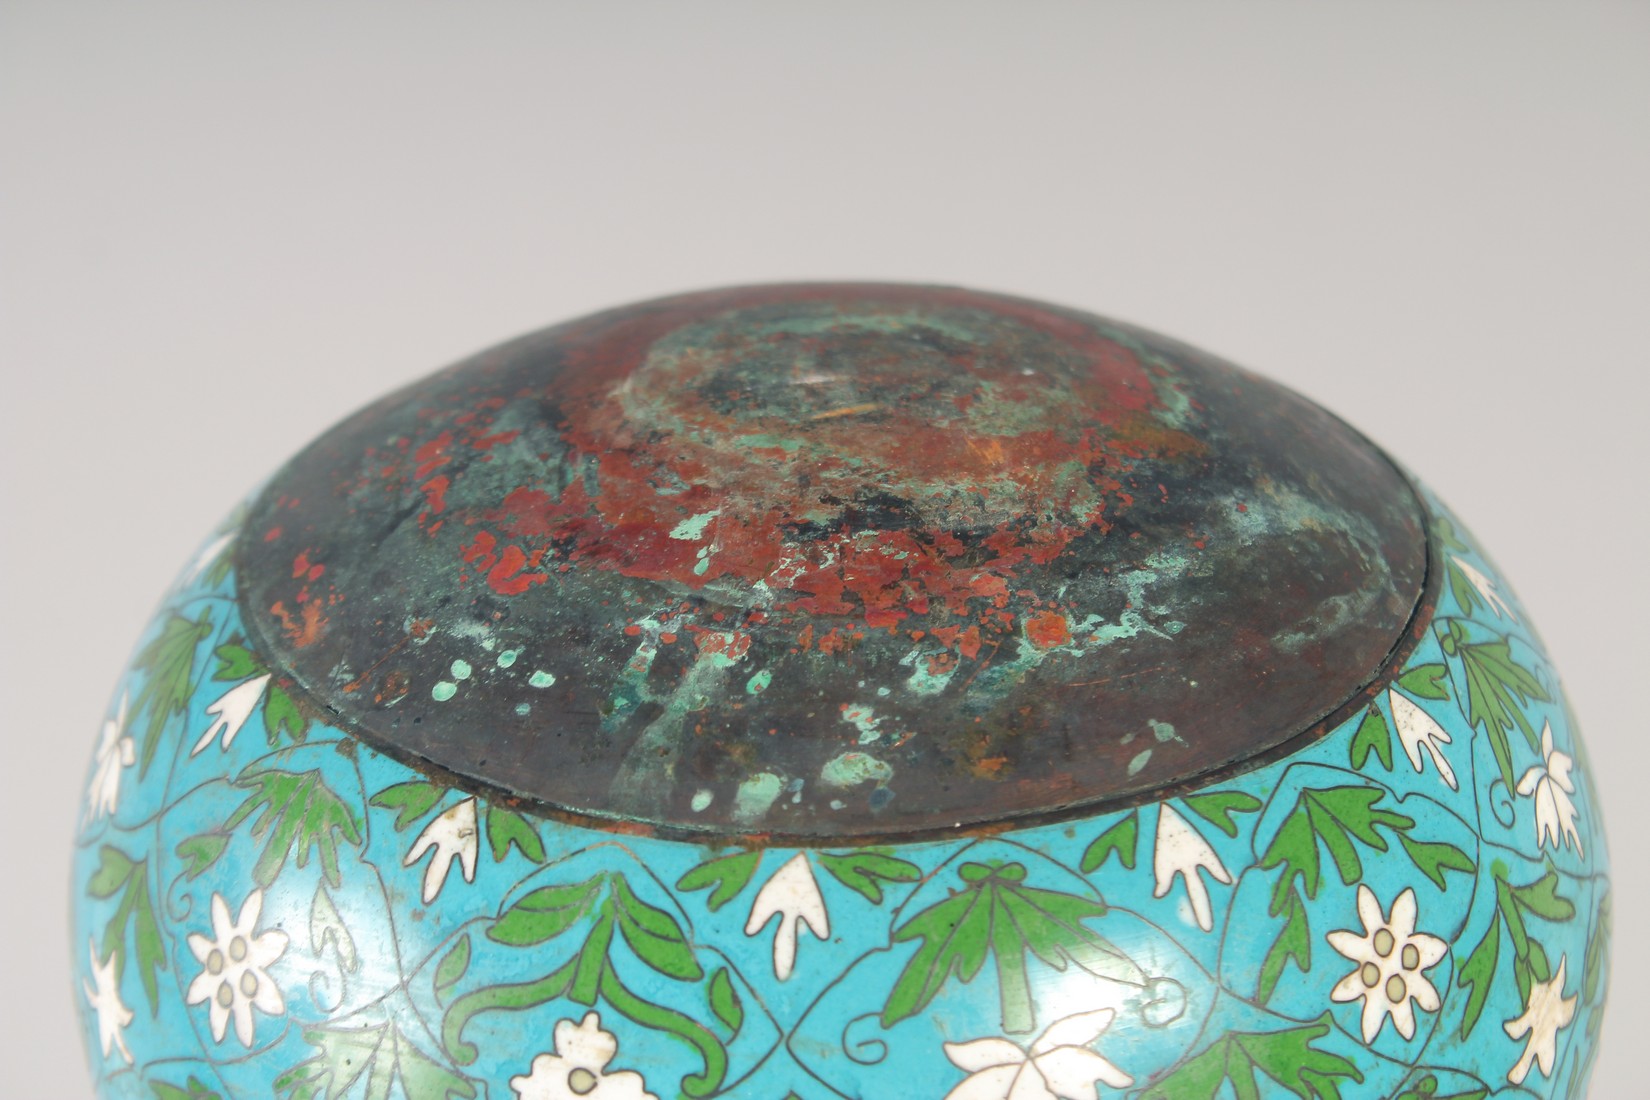 A RARE 19TH CENTURY CHINESE CLOISONNE ENAMELLED HUQQA BASE, for the Islamic Indian market, 15cm - Image 2 of 5